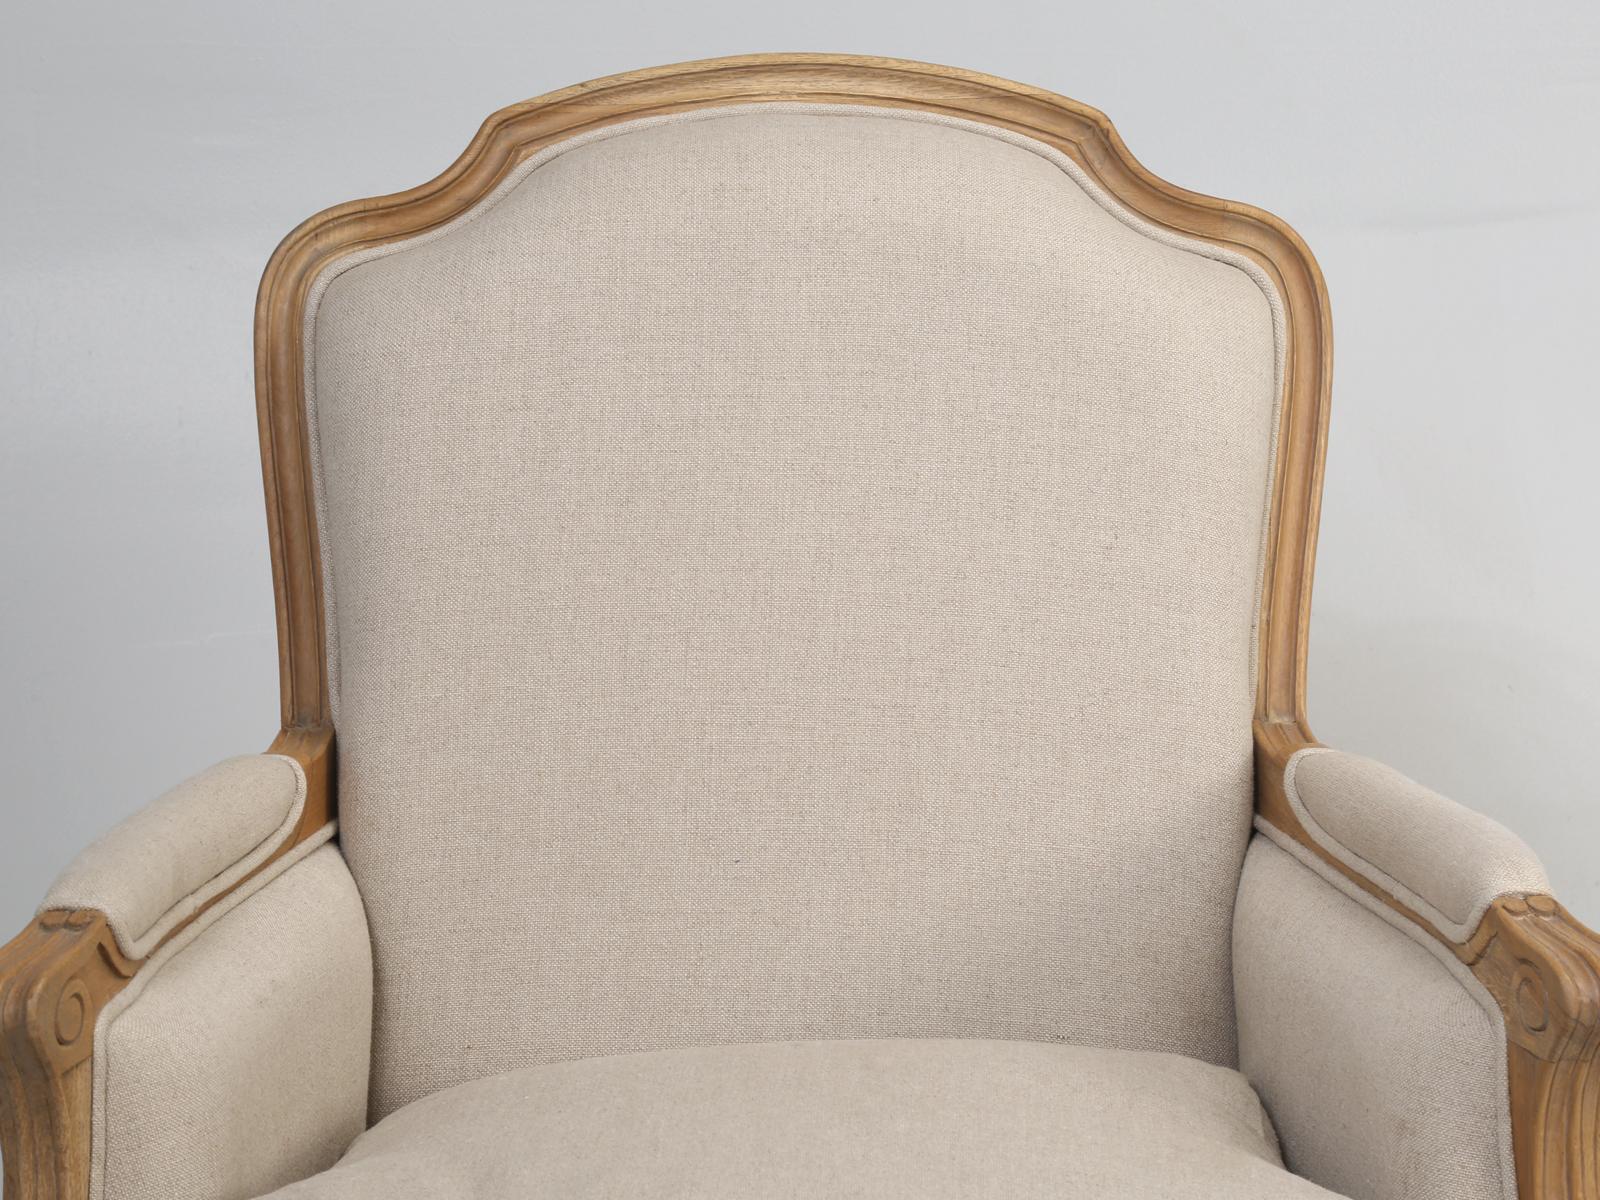 Bergère is defined as an enclosed upholstered French armchair, that is fully upholstered. The bergère is generally fitted with a loose, although tailored seat cushion. Originally designed for lounging in comfort, with a wider and deeper seat. The